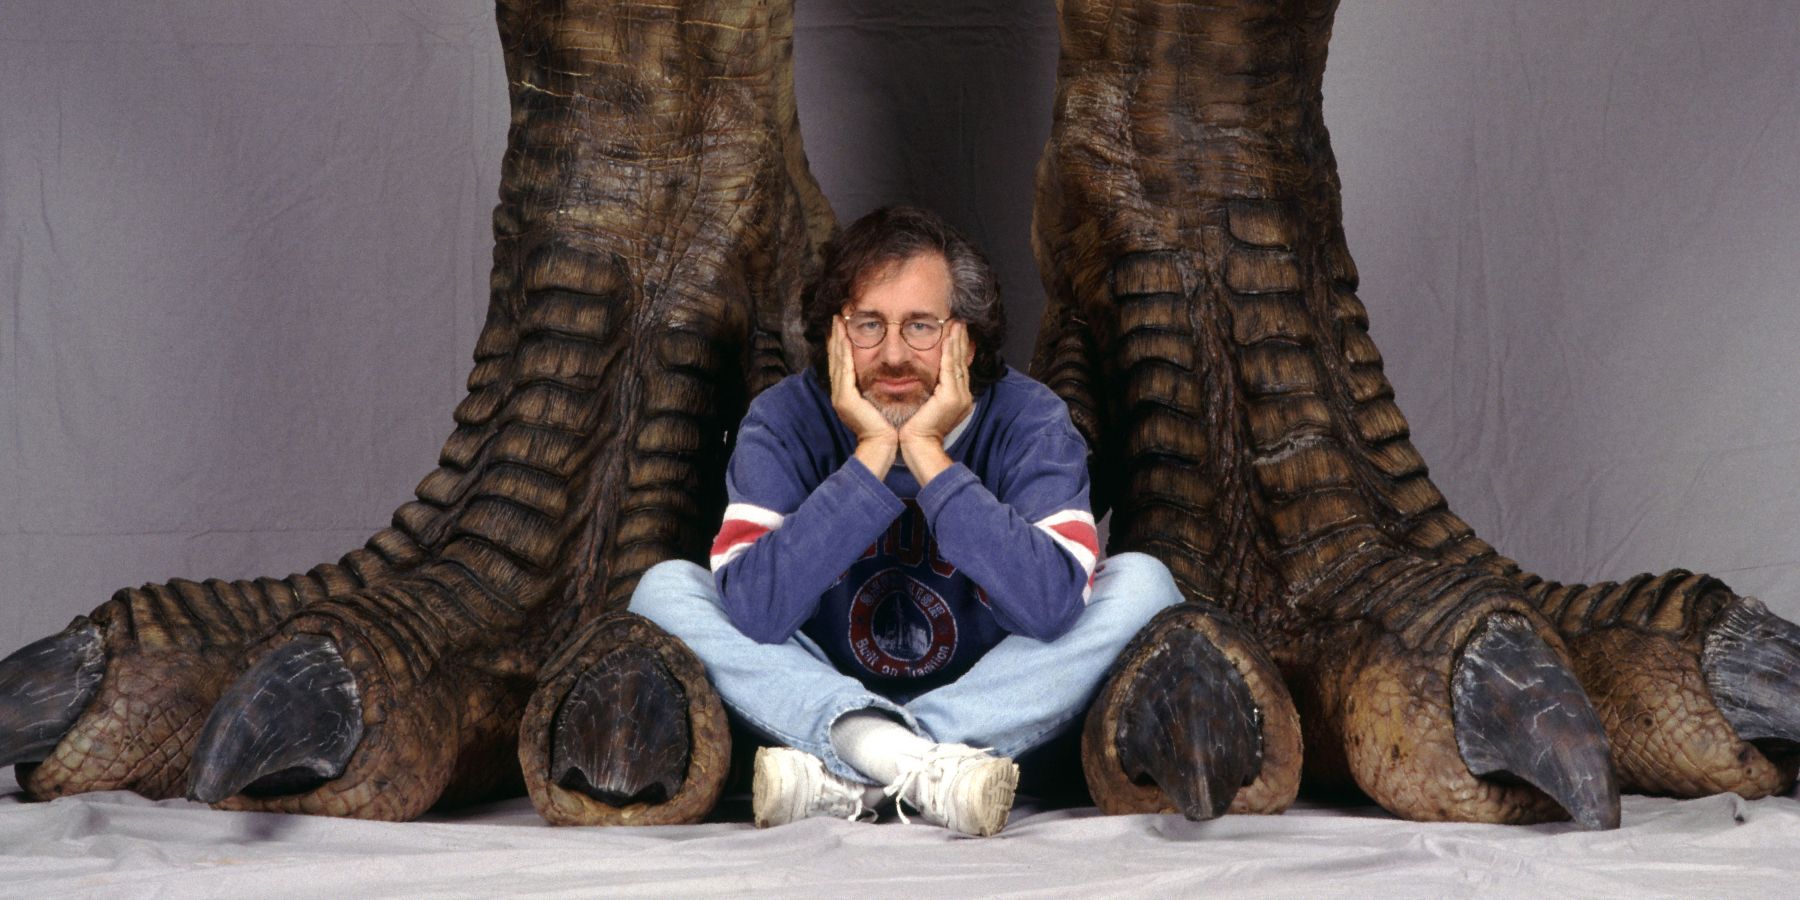 Steven Spielberg sitting between the feet of a T-Rex in a promo image for Jurassic Park